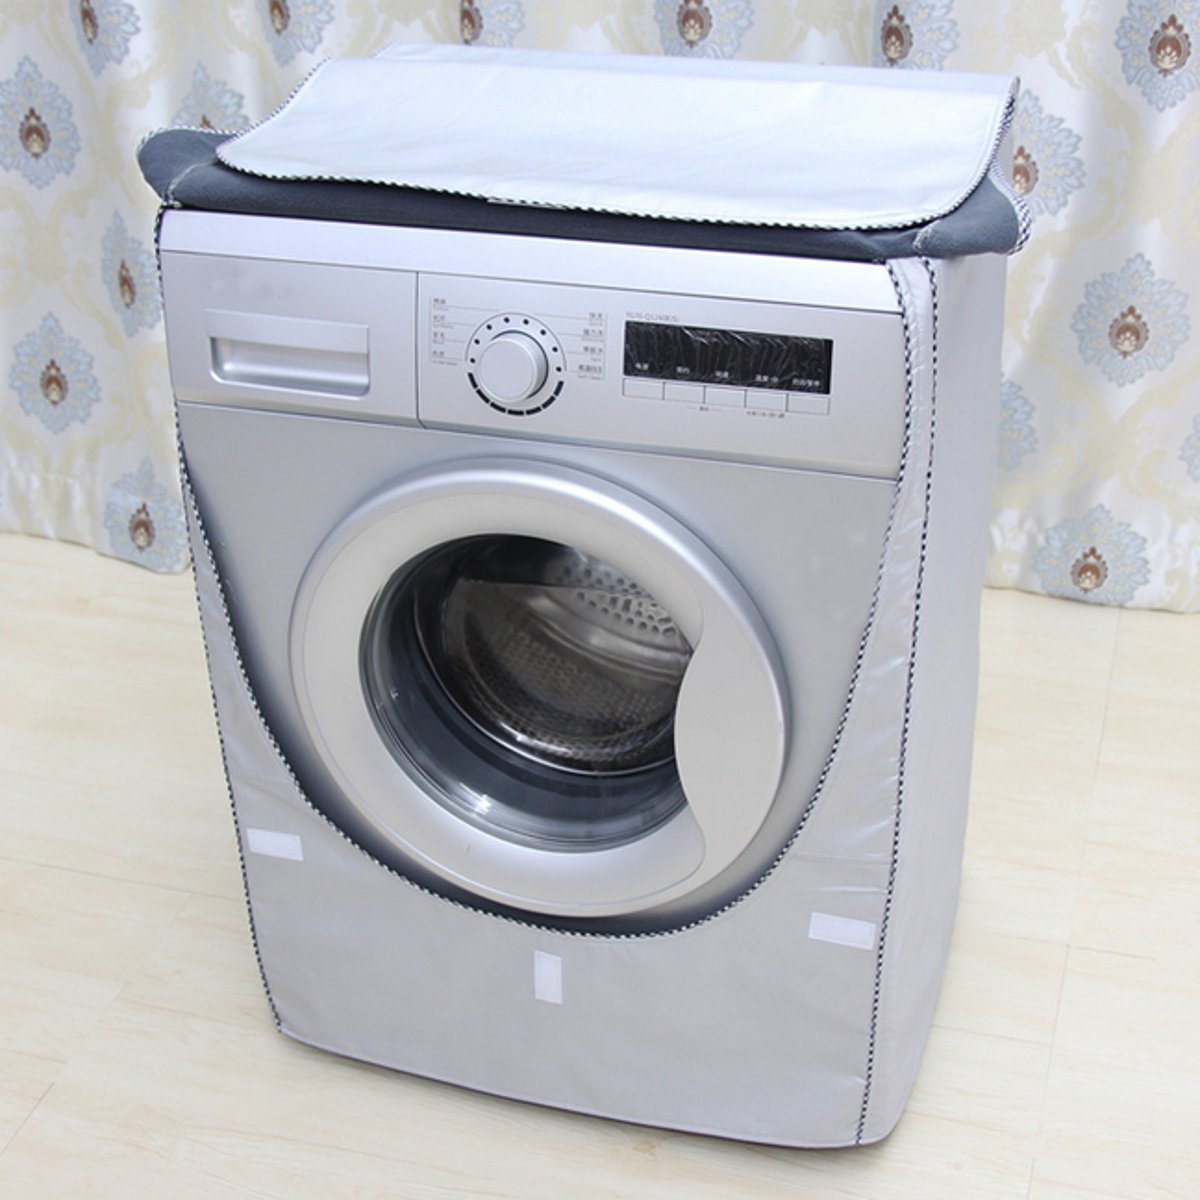 Polyester Waterproof Cover Washer Sunscreen Washing Machine Dryer Household Automatic Roller Machine Silver Dustproof Dust Cover